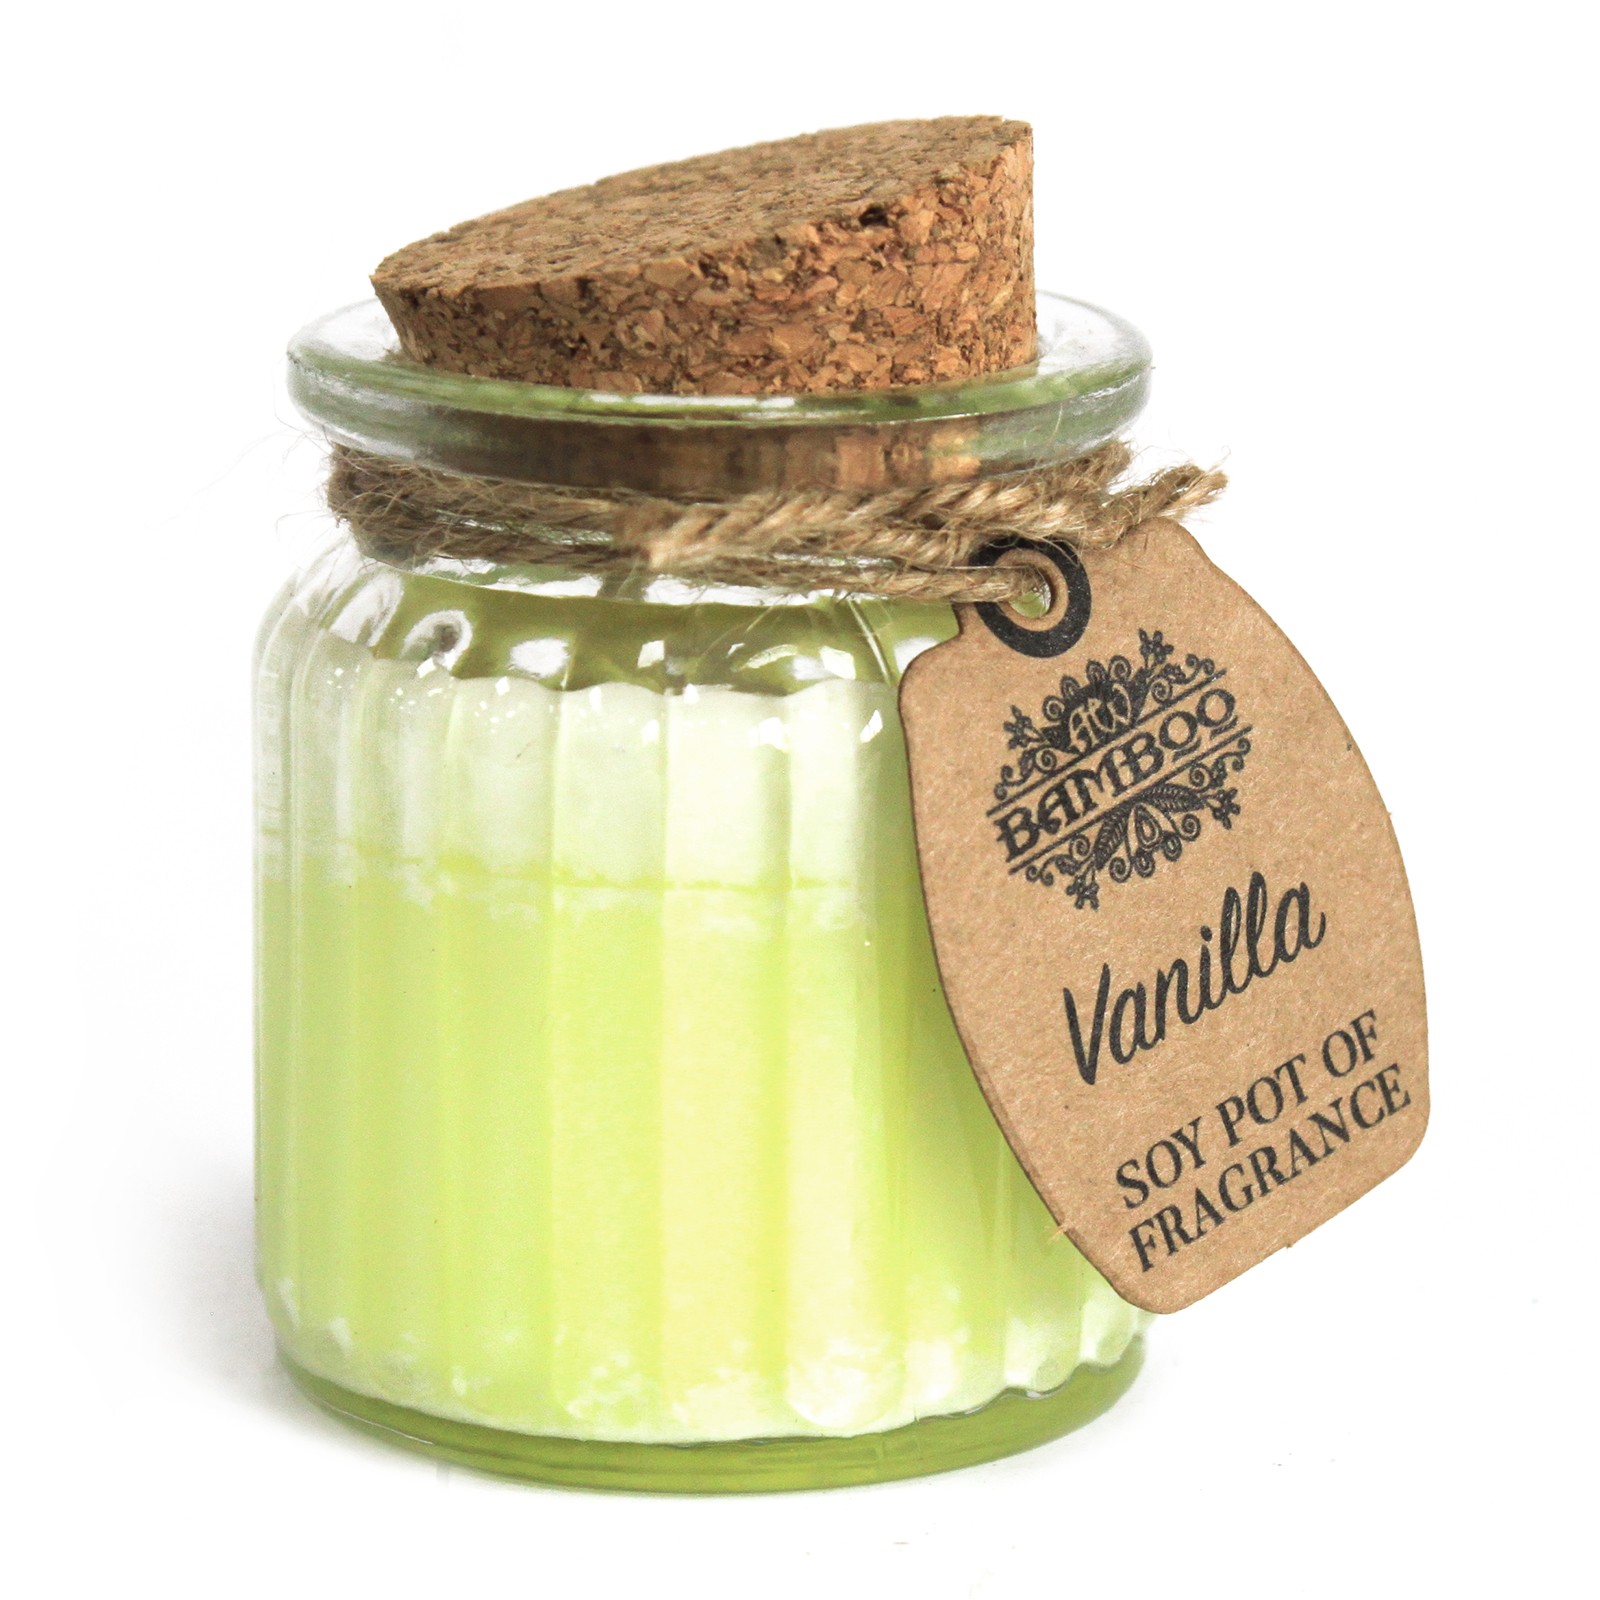 Vanilla Soy Wax Candle - Scented Pot Candle